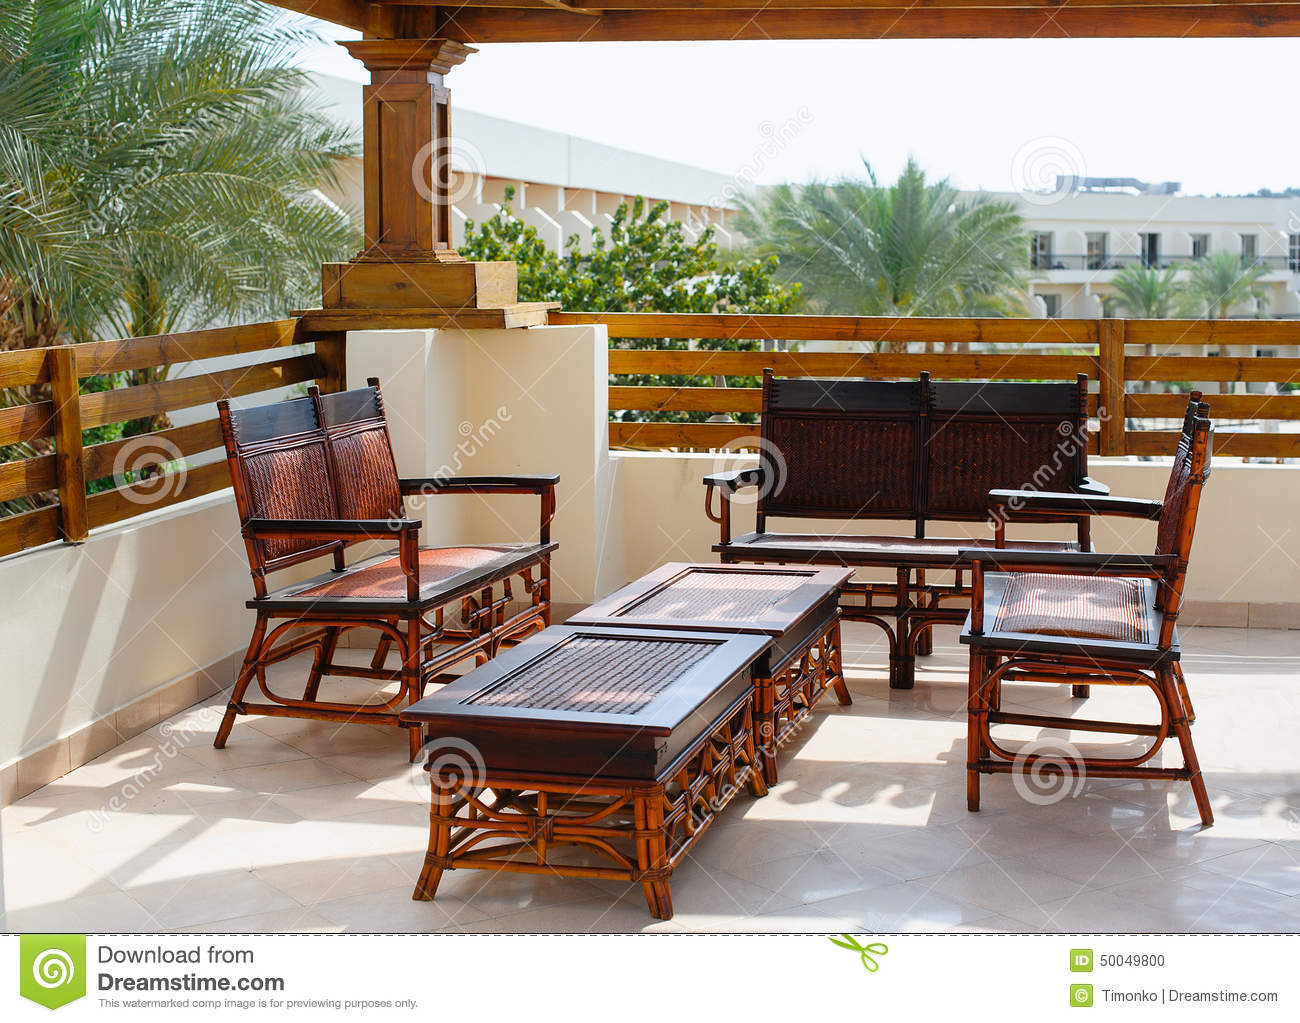 Wicker Furniture On The Balcony Stock Photo   Image  50049800